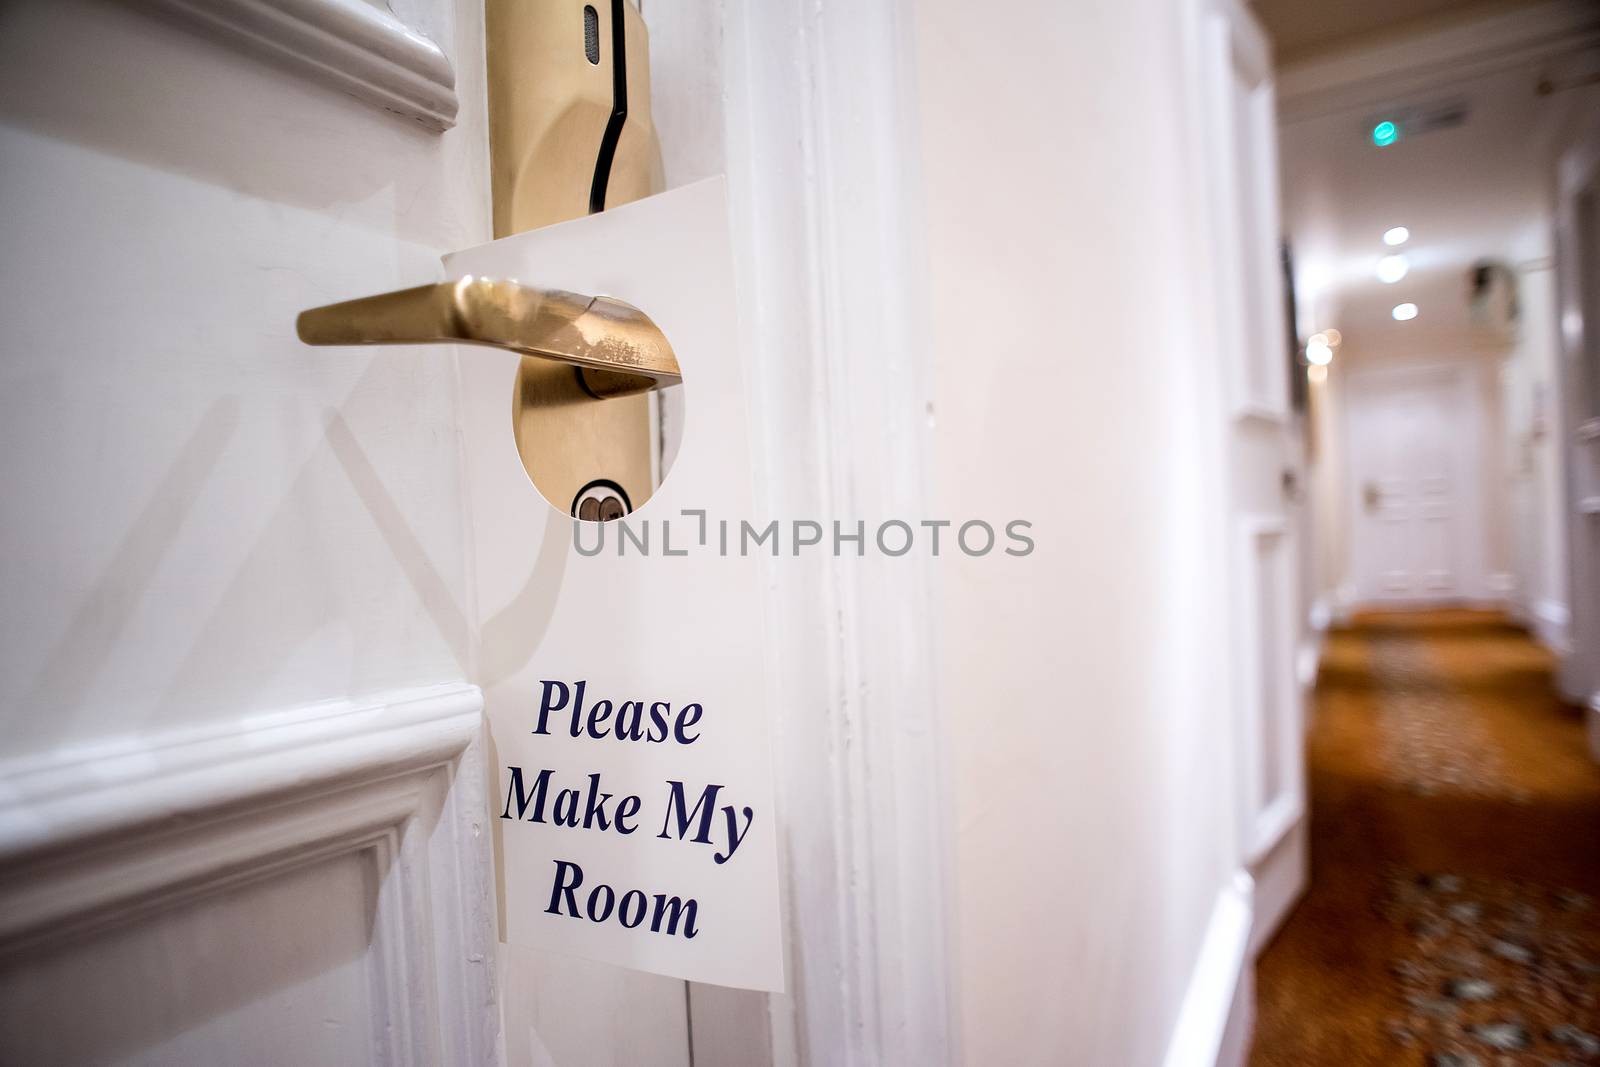 Please make up my room sign by stockyimages